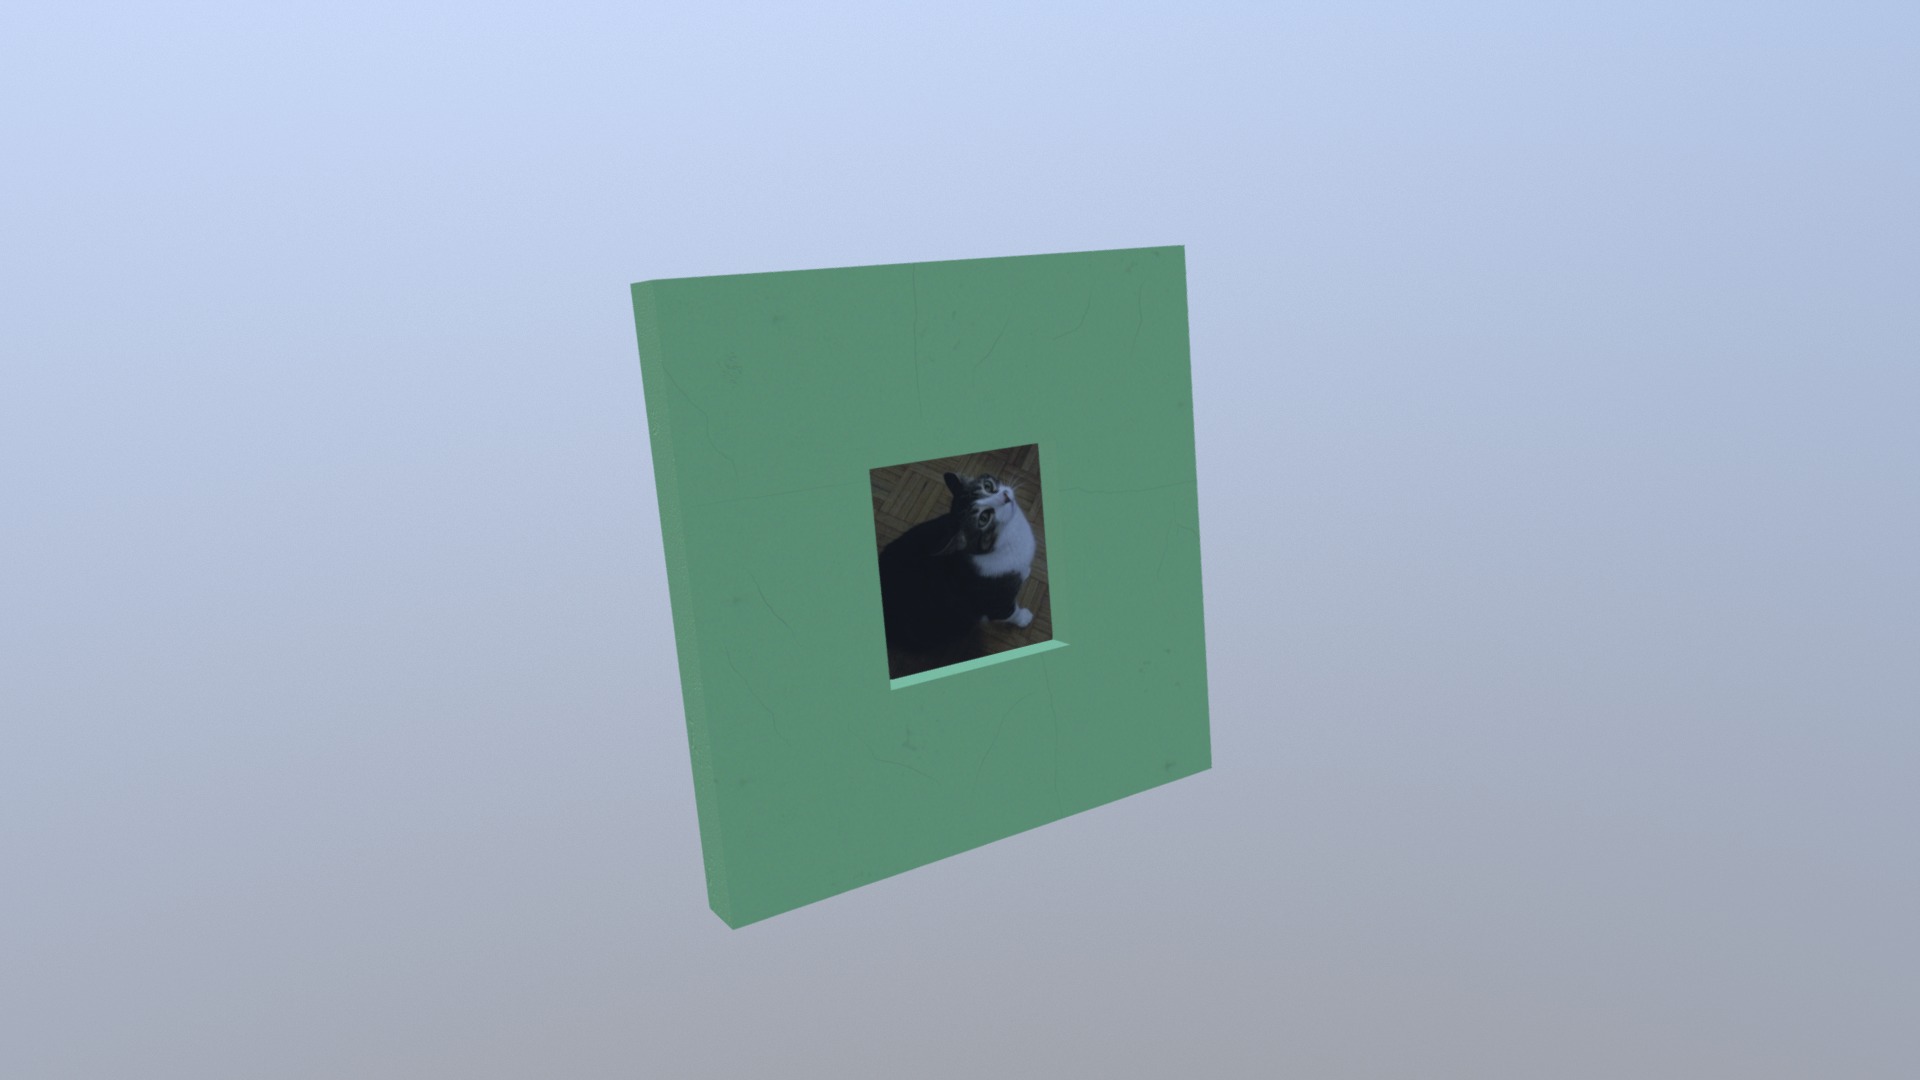 3D model Marco fotos 3 - This is a 3D model of the Marco fotos 3. The 3D model is about a green square with a white and black image on it.